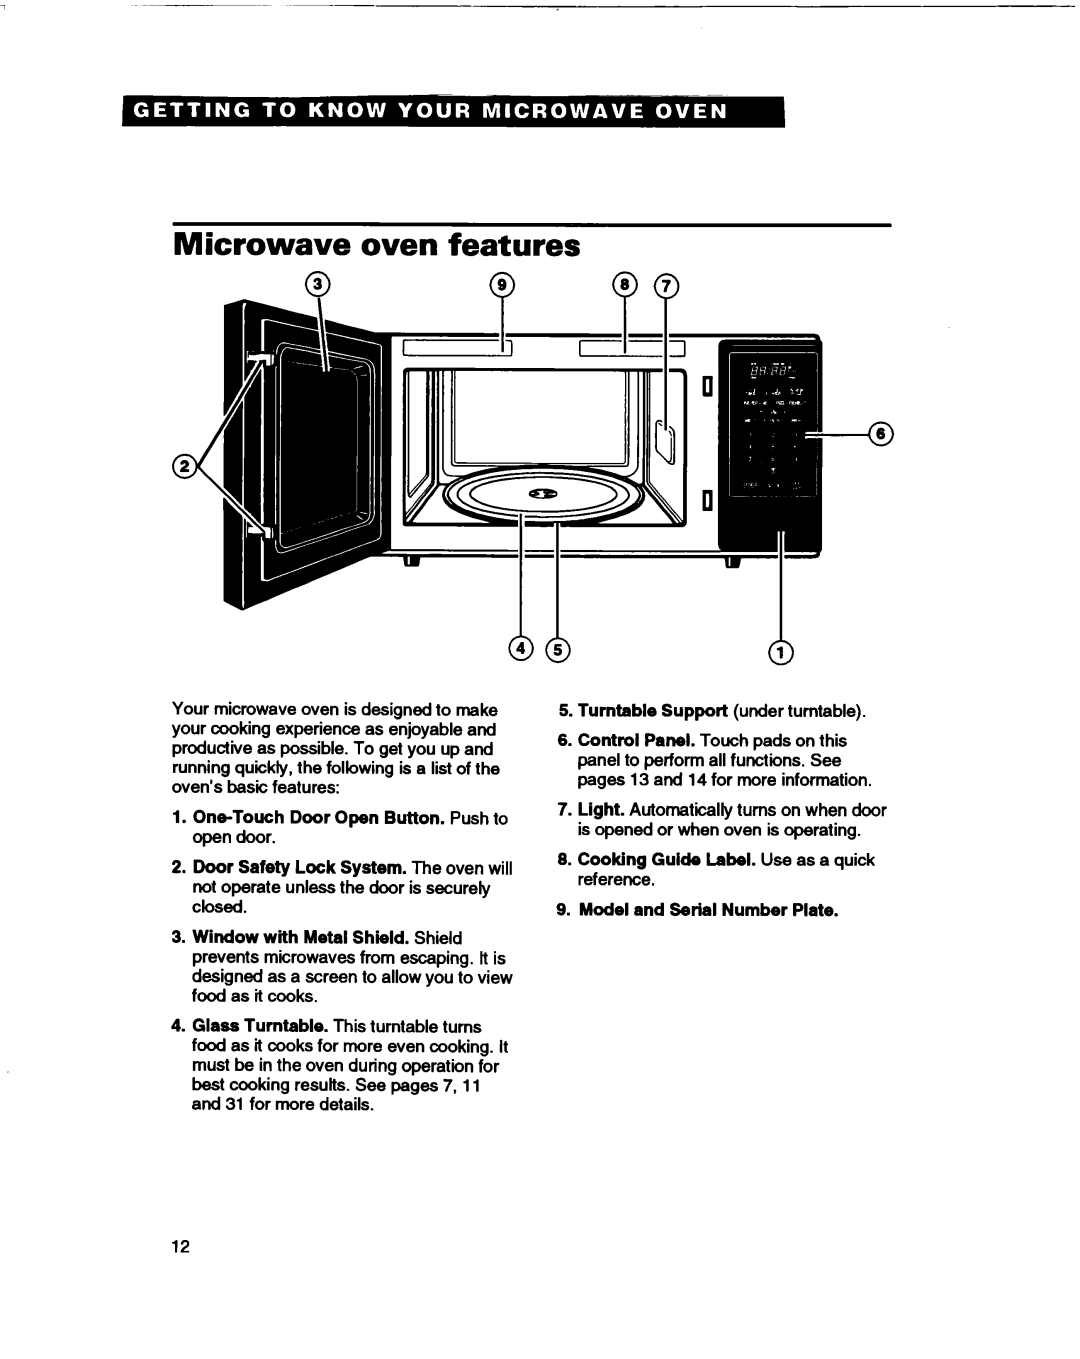 Whirlpool MT1061XB Microwave oven features, Turntable Support under turntable, Model and Serial Number Plate 